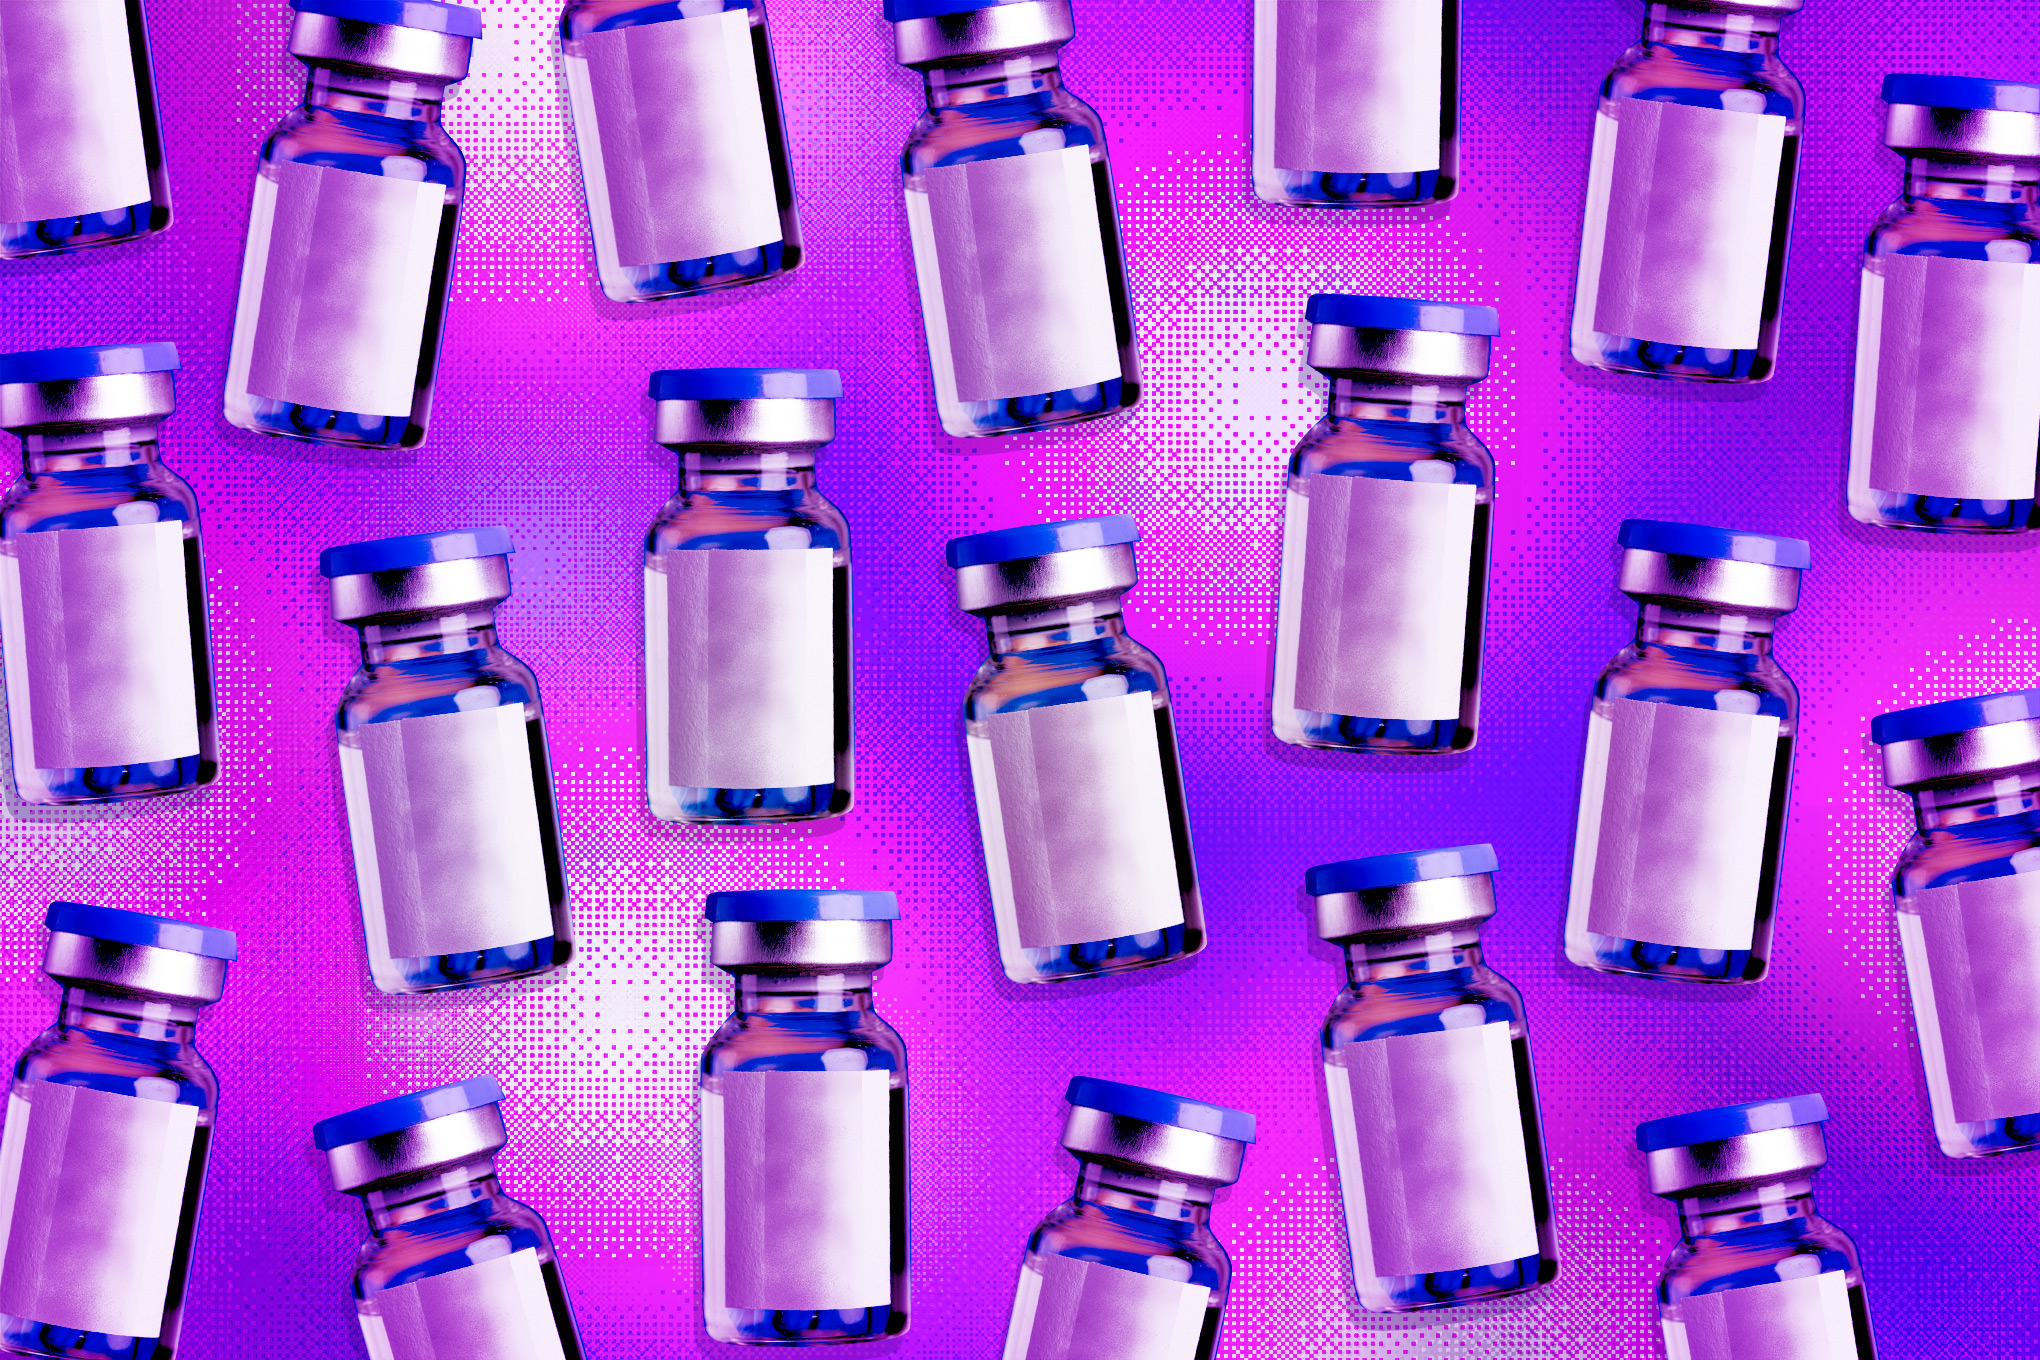 An illustration of several vaccine vials over a pink and purple background.